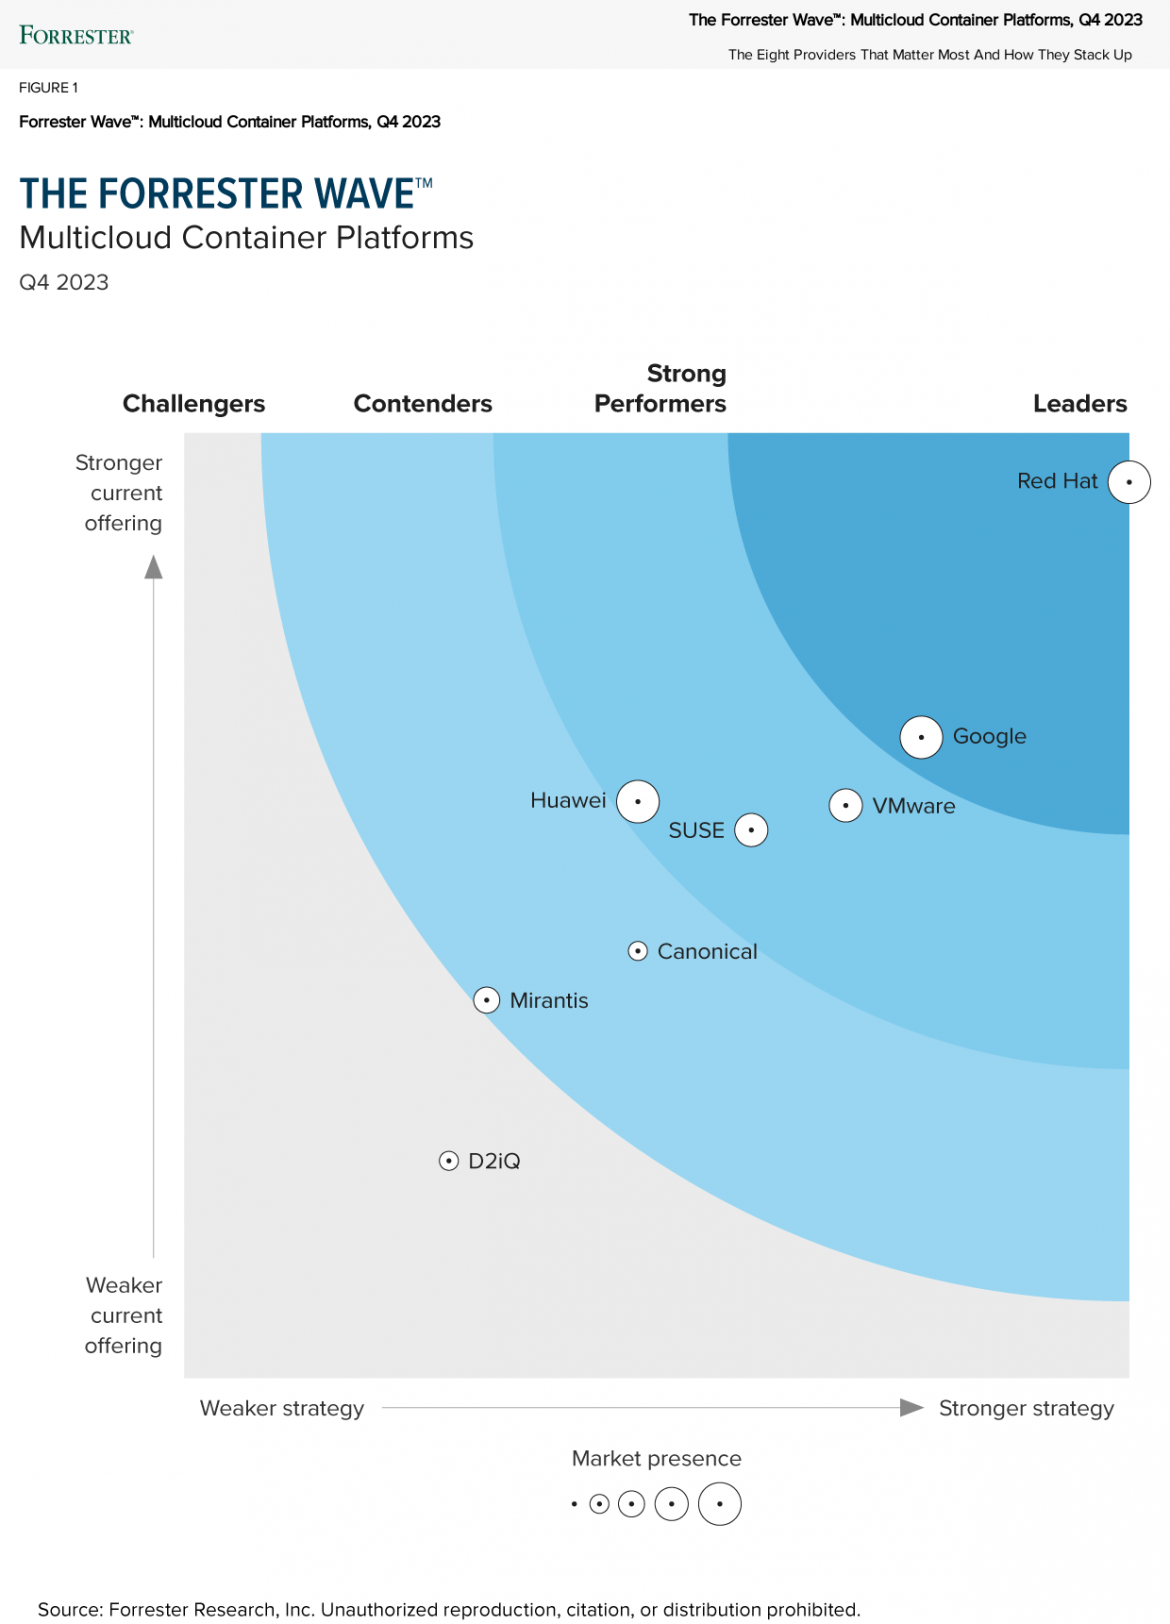 Red Had a “Leader” in the 2023 Forrester Wave™: Multicloud Container Platforms